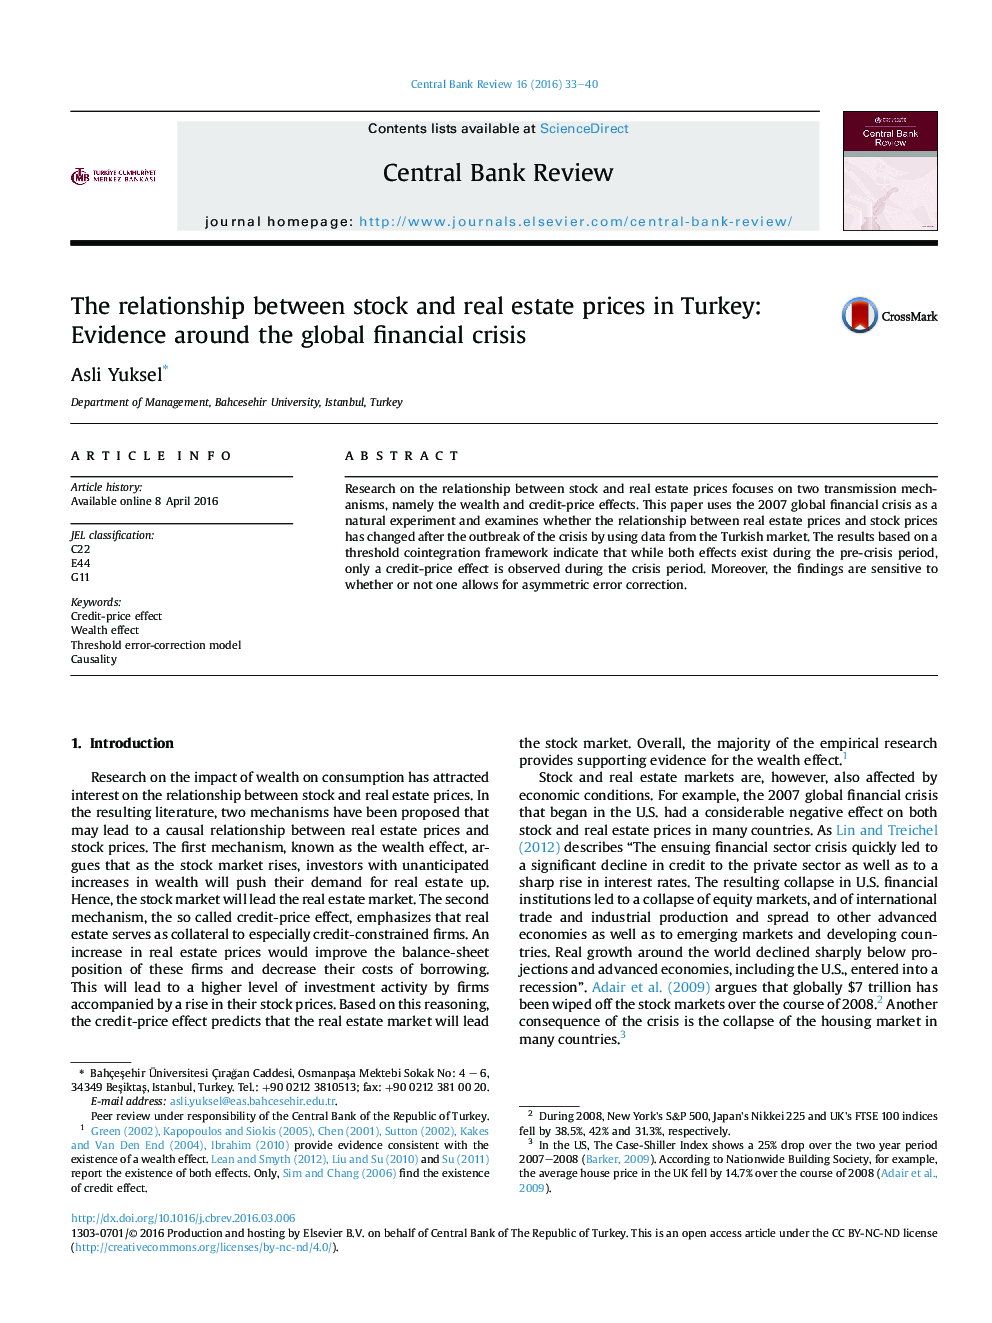 The relationship between stock and real estate prices in Turkey: Evidence around the global financial crisis 